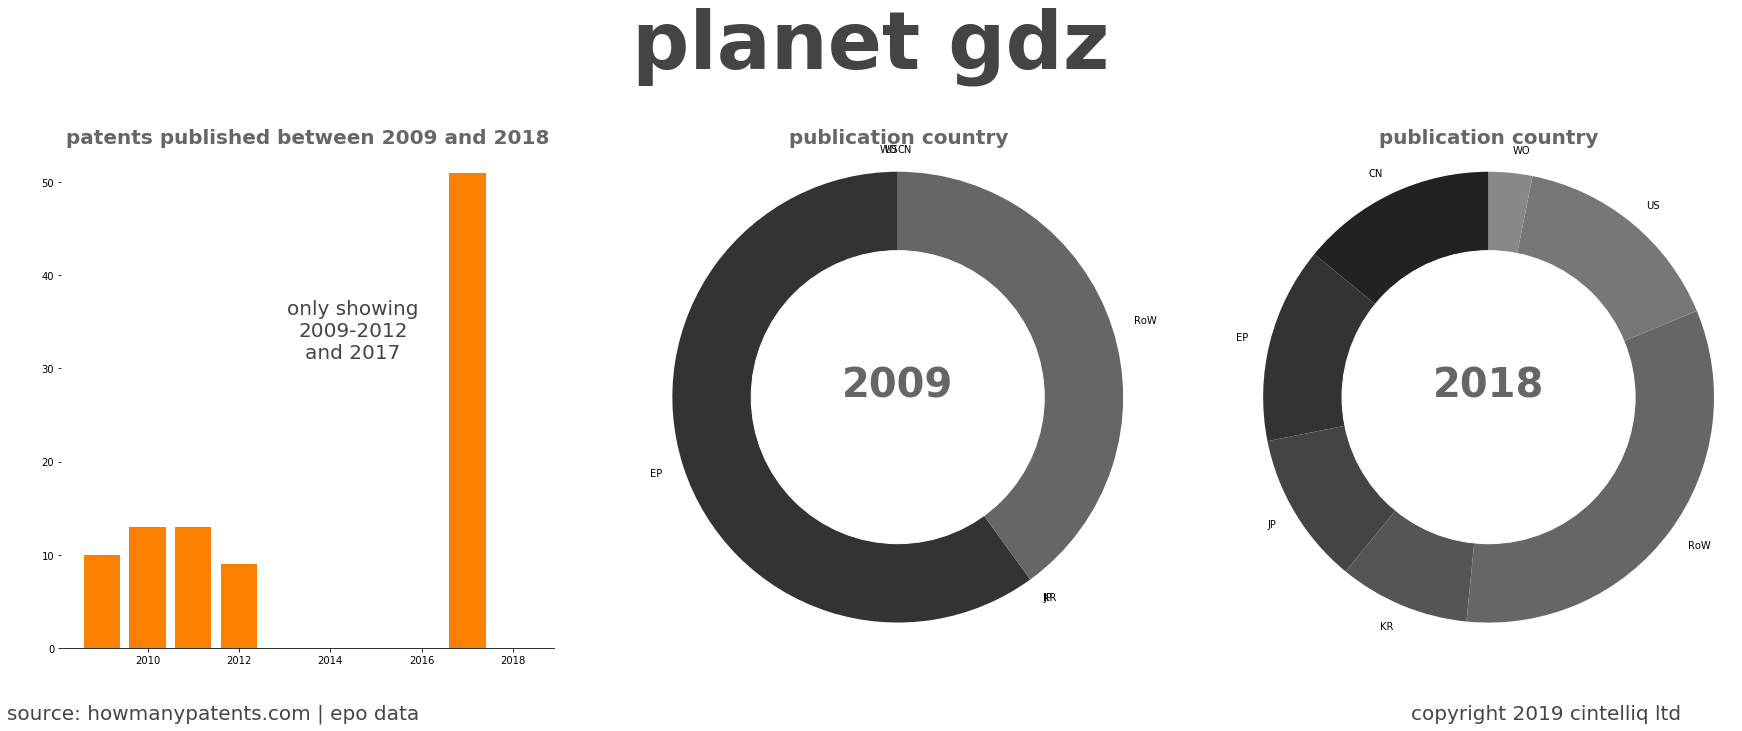 summary of patents for Planet Gdz